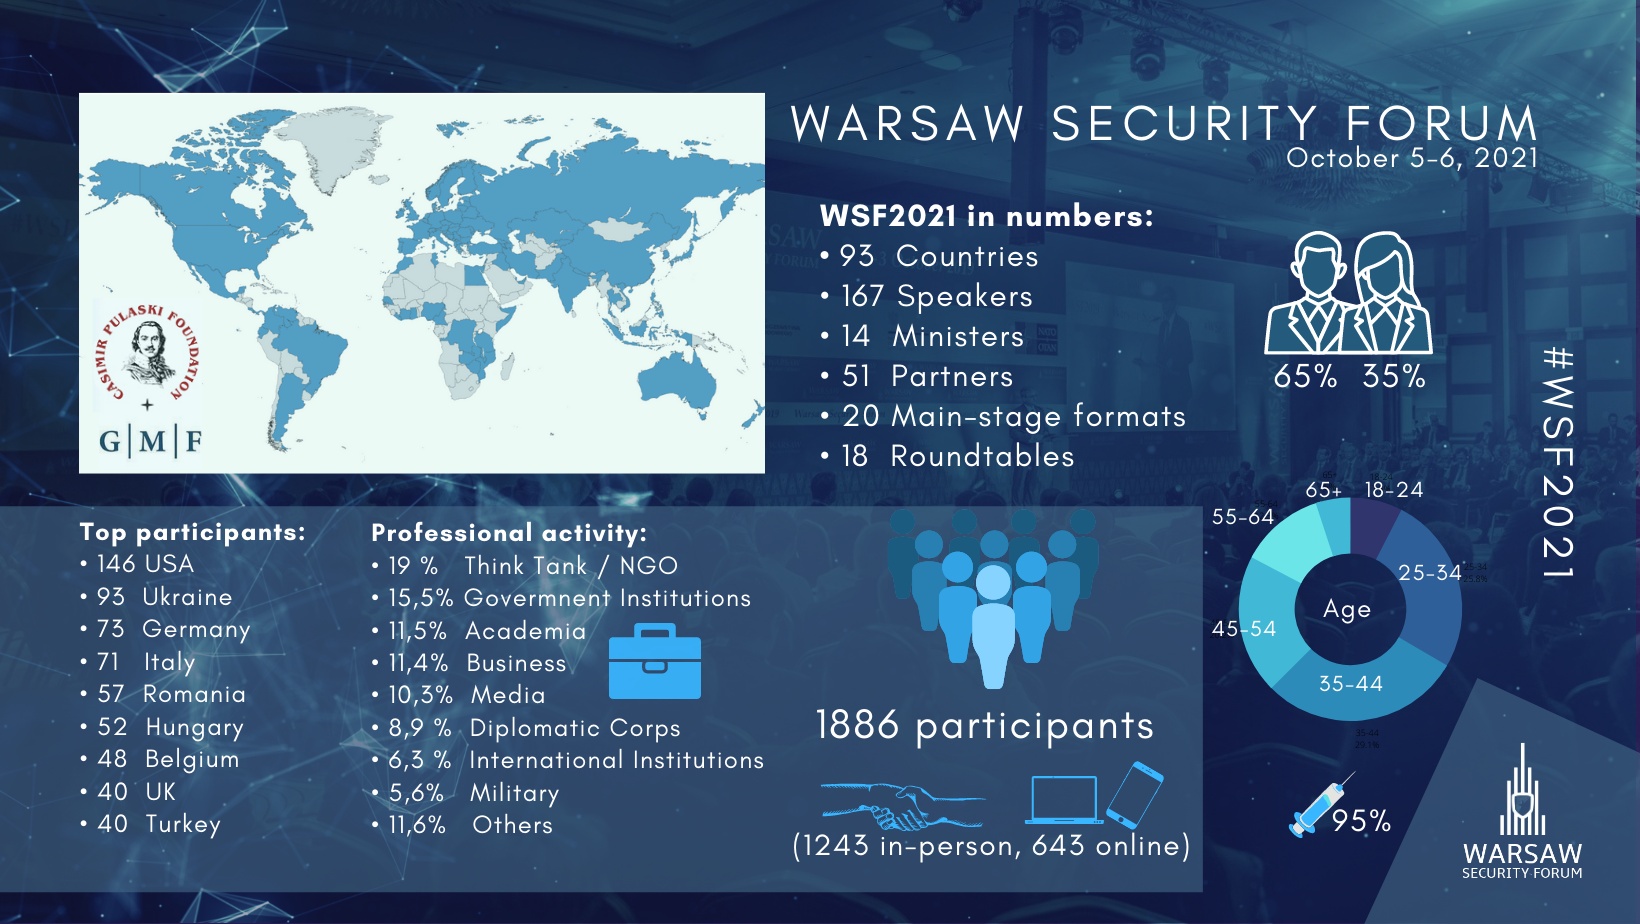 Warsaw Security Forum 2021 in numbers